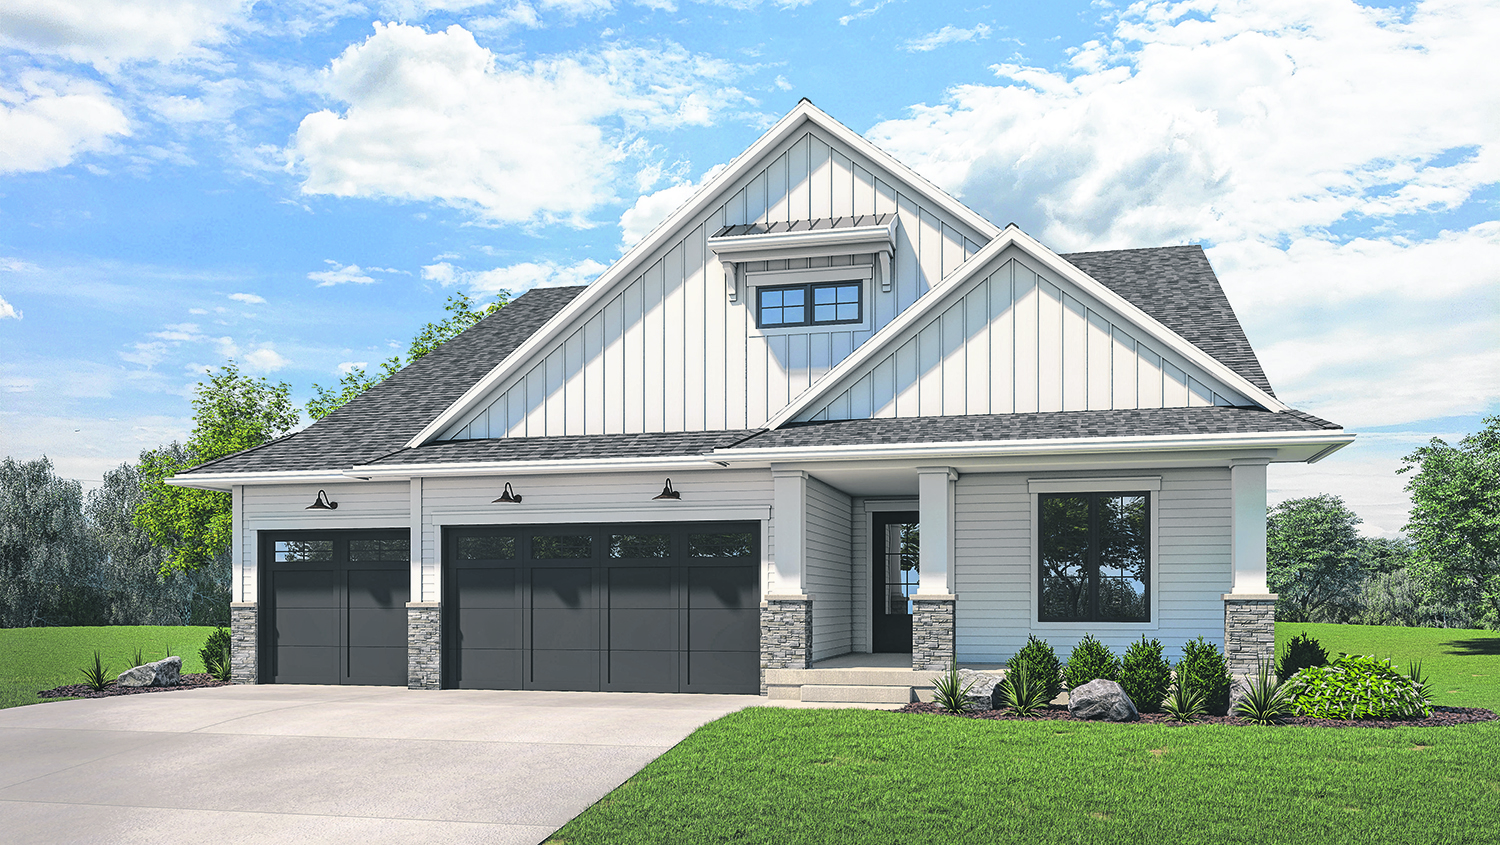 Hodge construction 926 long dr rendering